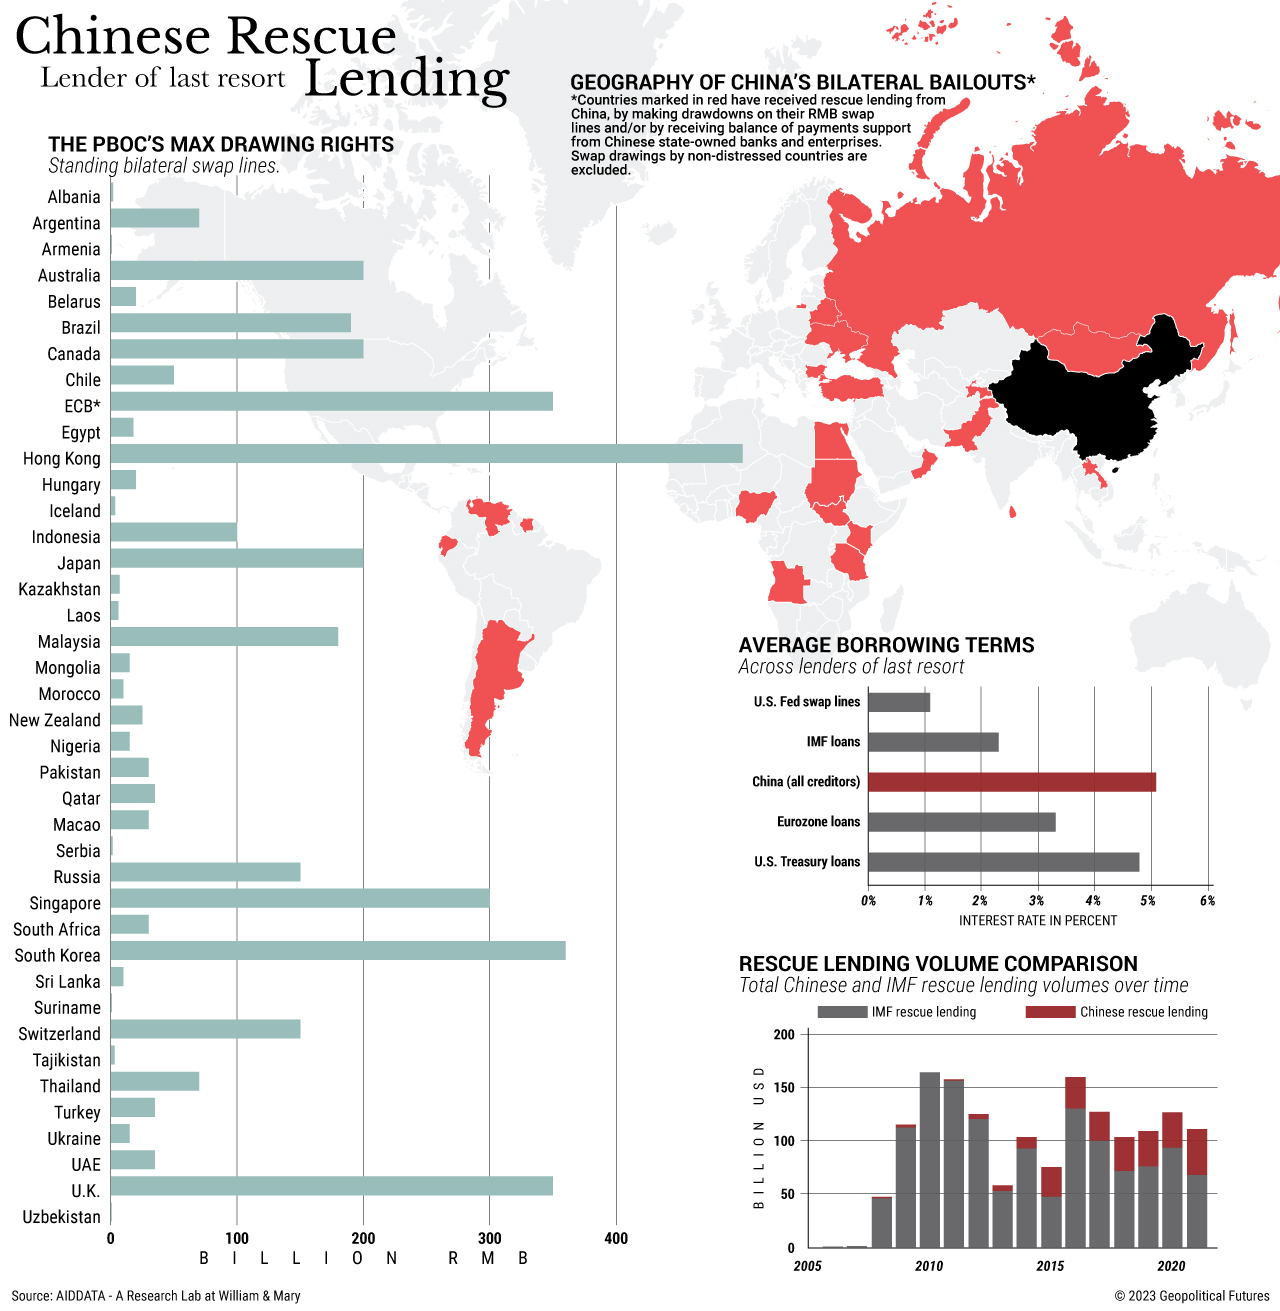 Chinese Rescue Lending